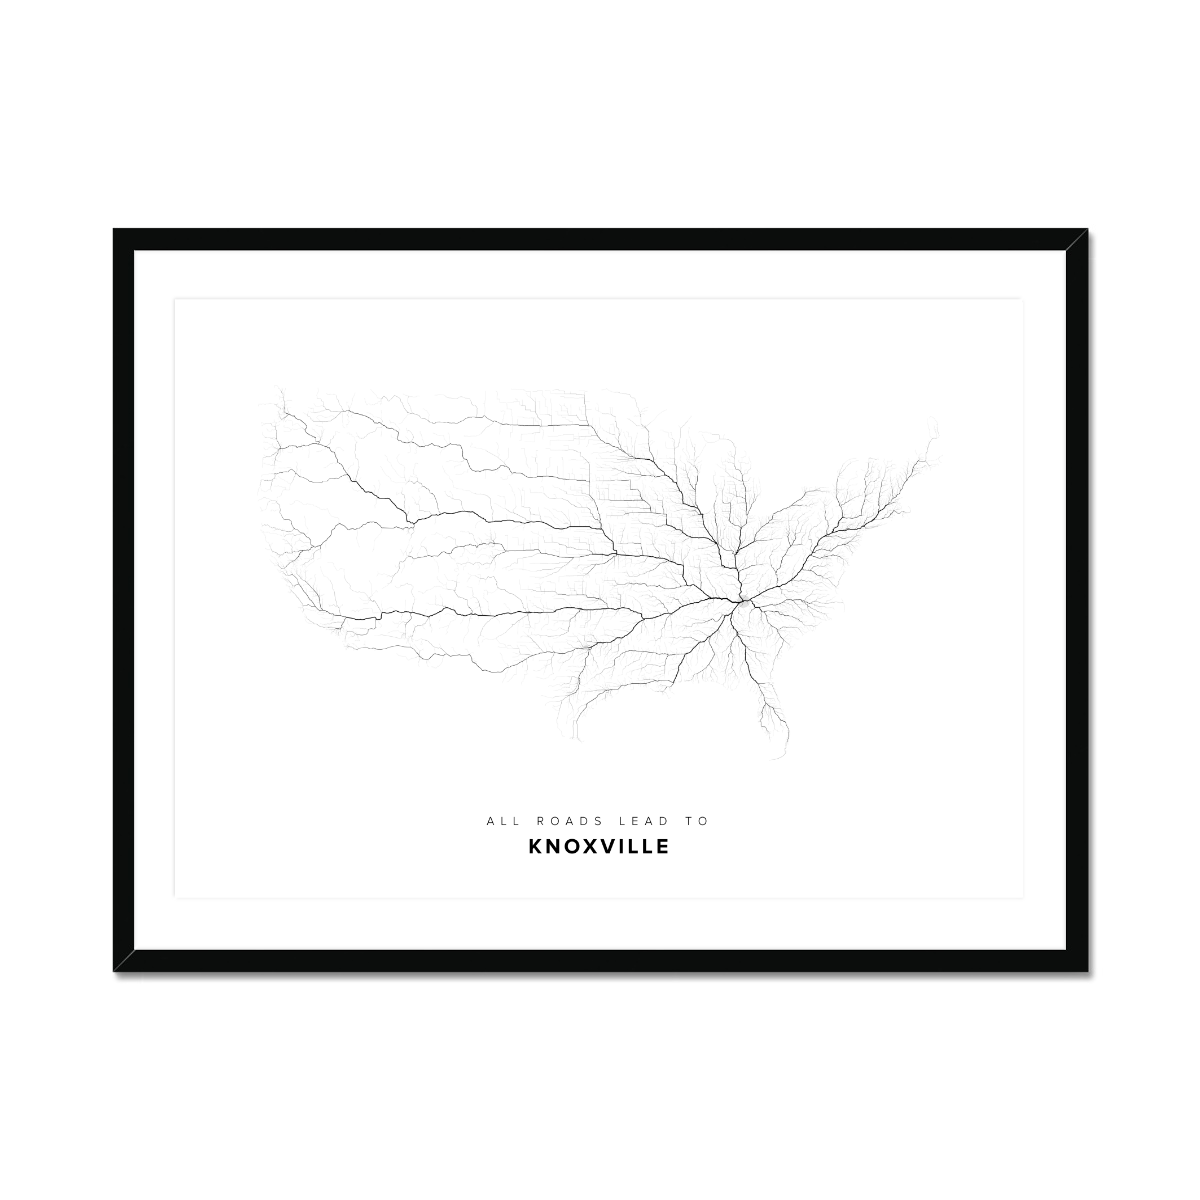 All roads lead to Knoxville (United States of America) Fine Art Map Print